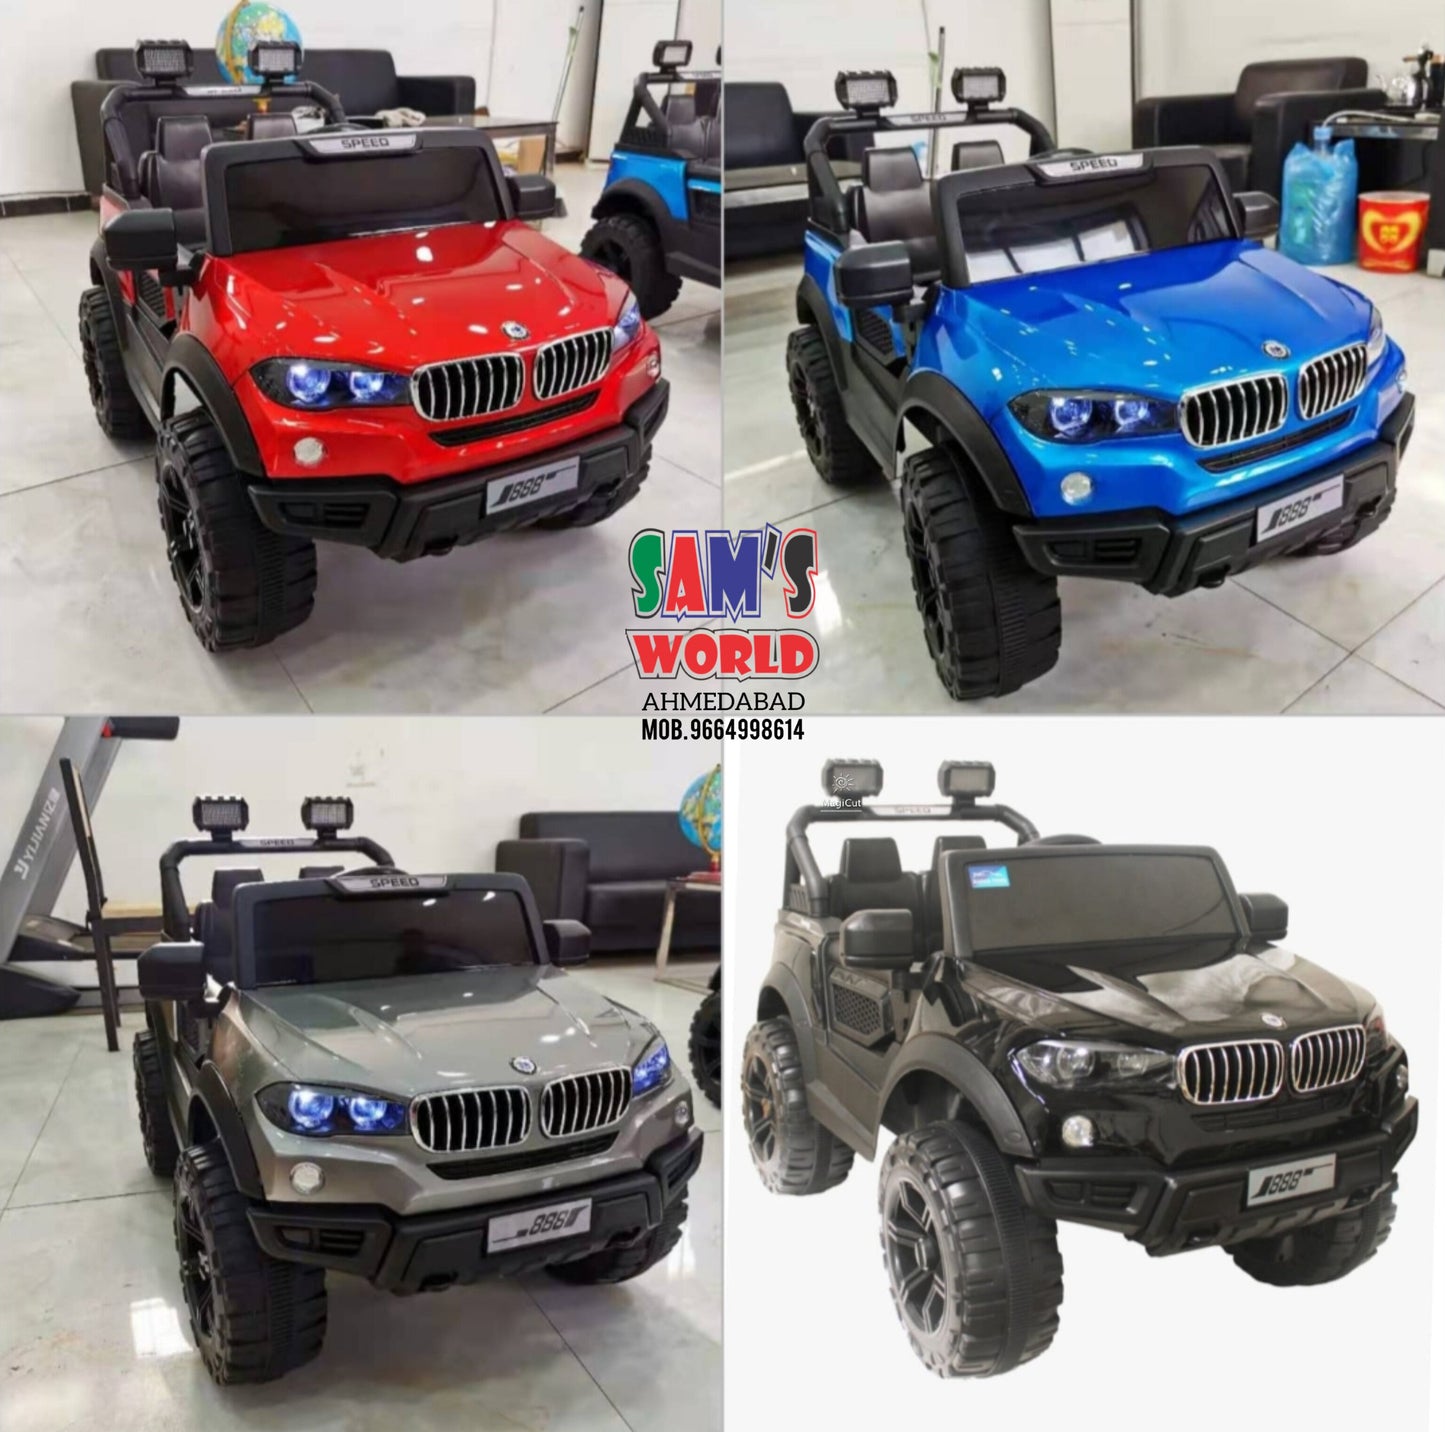 New 2023 Suv for 1 TO 8 age boys and girls | battery operated best car in Ahmedabad Gujarat | 888 - samstoy.in